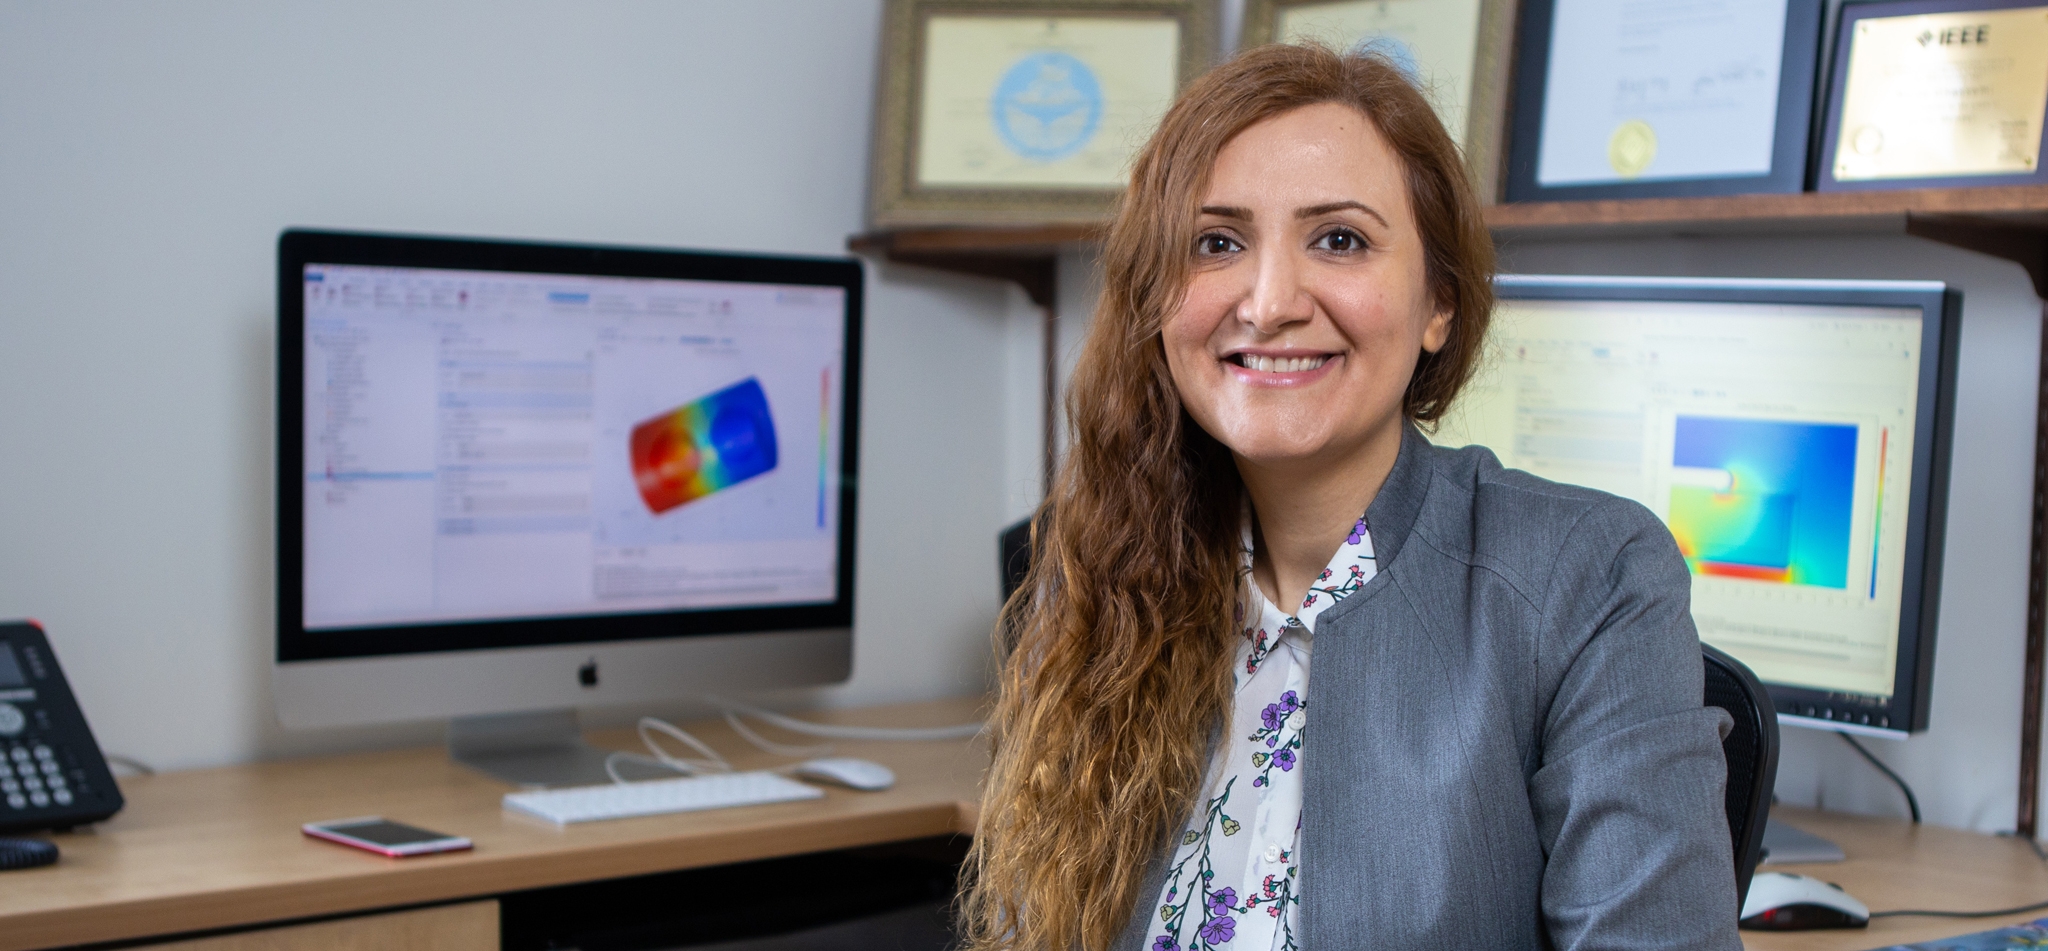 Mona Ghassemi is studying how insulators degrade when used with Wide Bandgap-based power electronics and under harsh conditions.